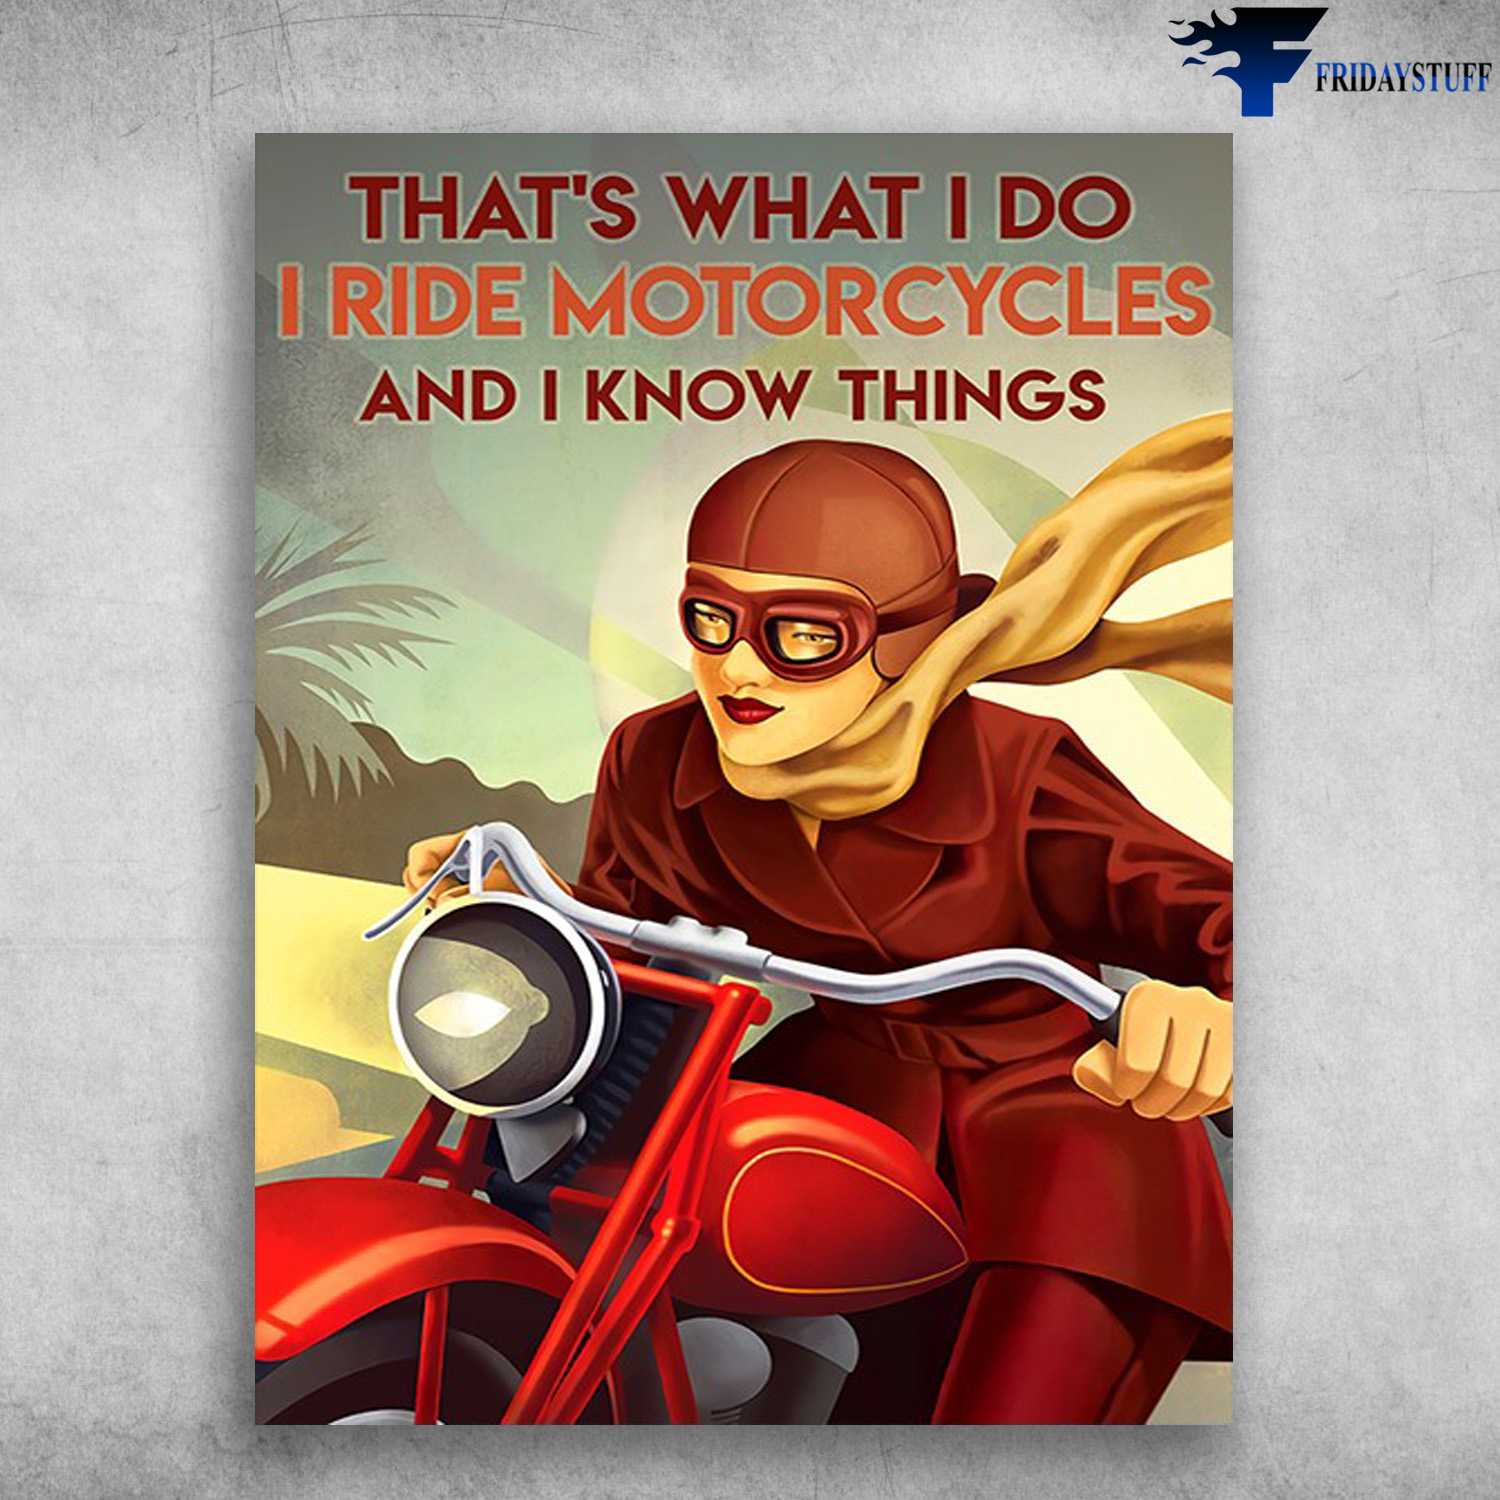 Lady Riding, Motorcycler Lover - That's What I Do, I Ride Motorcycles, And I Know Things